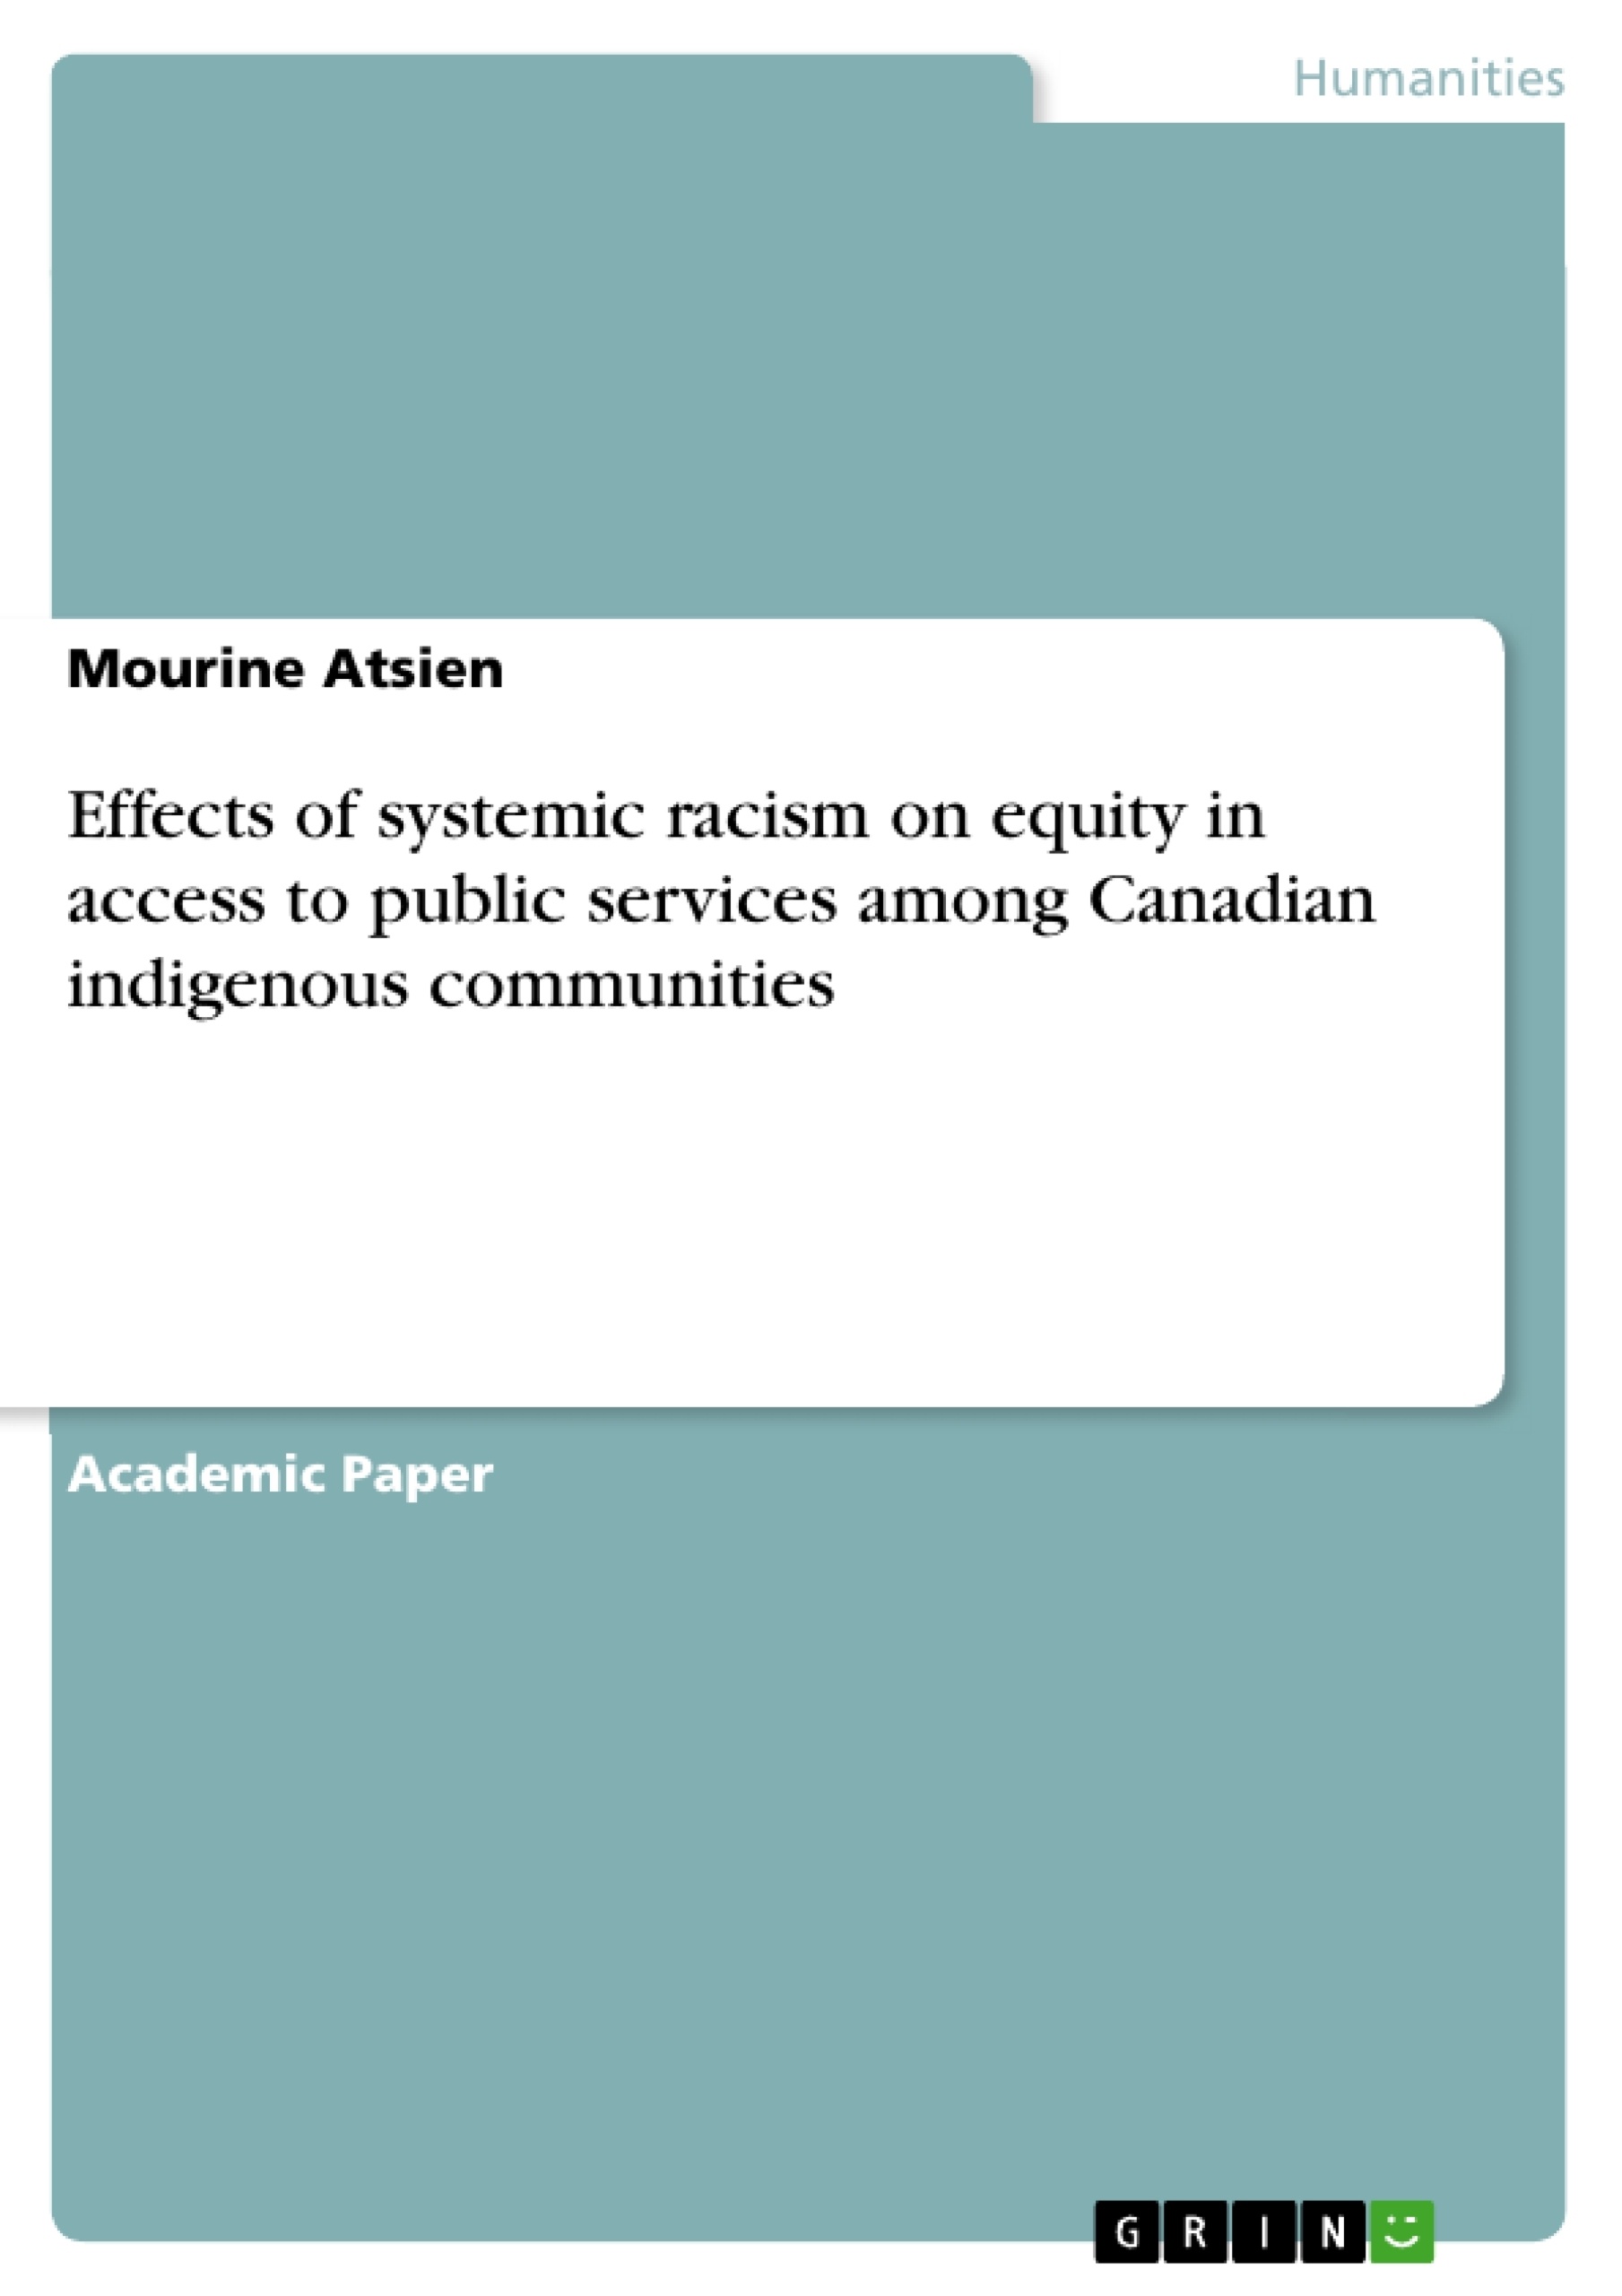 Title: Effects of systemic racism on equity in access to public services among Canadian indigenous communities